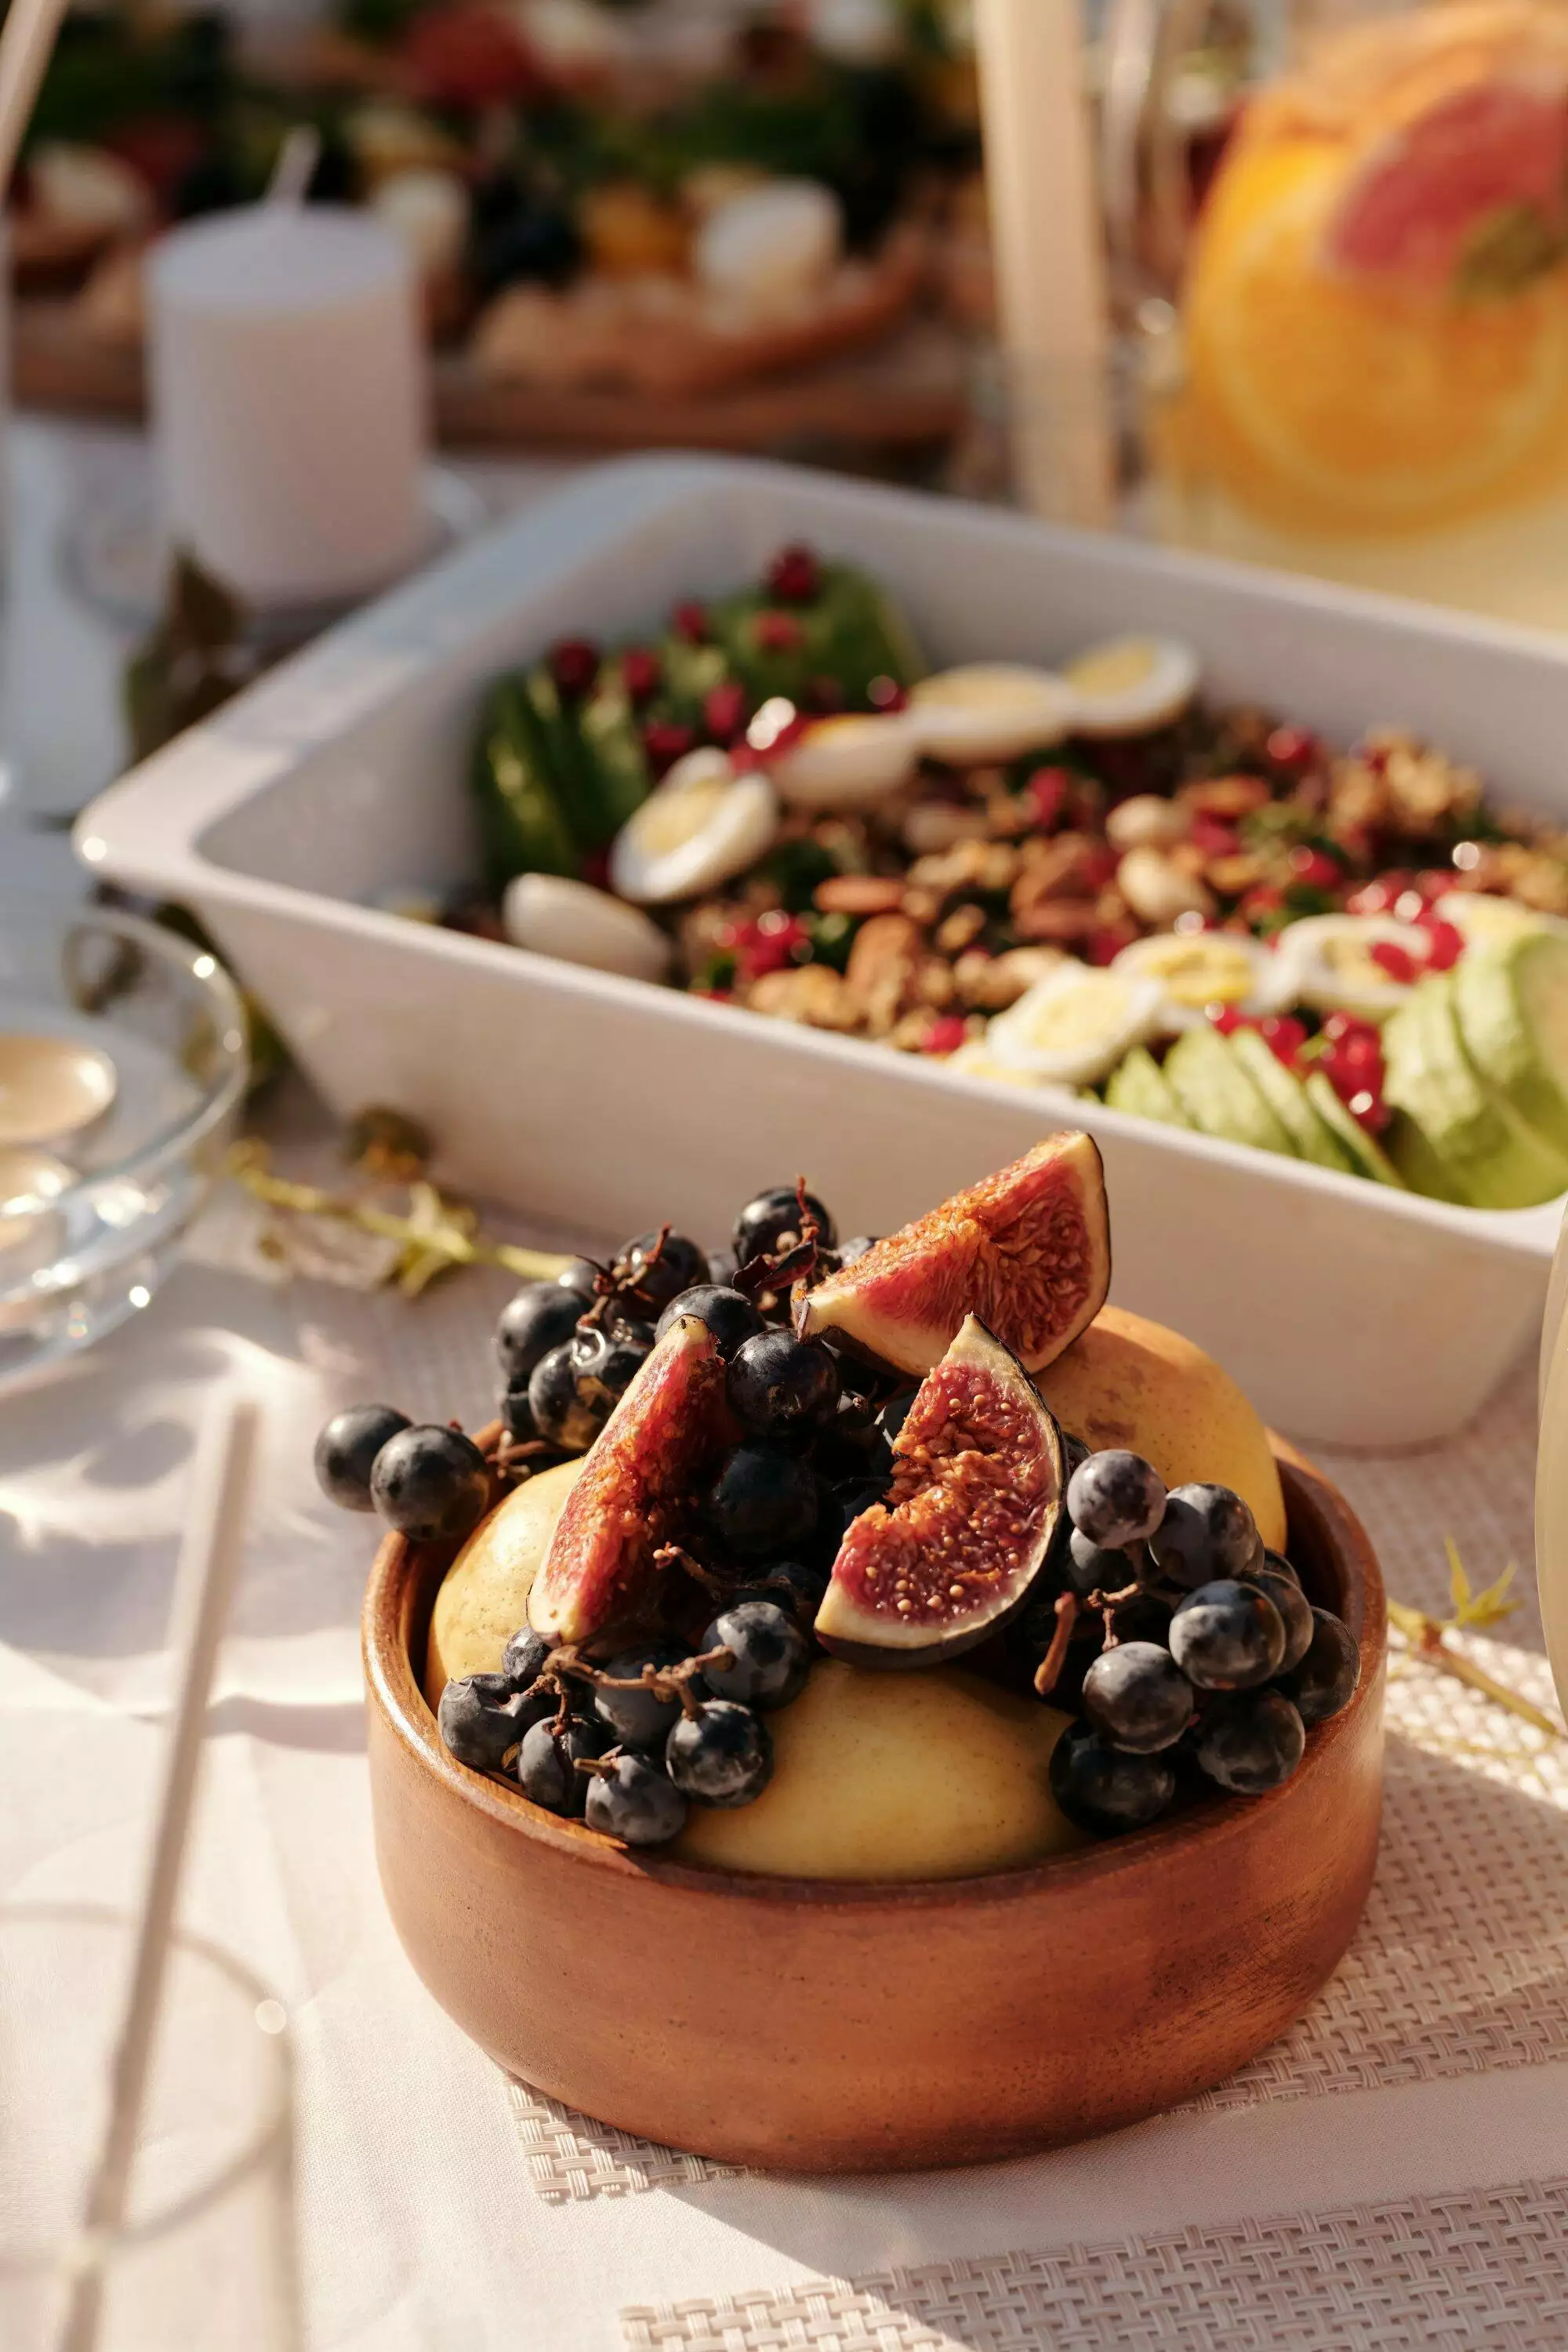 How to Create a Thanksgiving Fruit and Nut Centerpiece